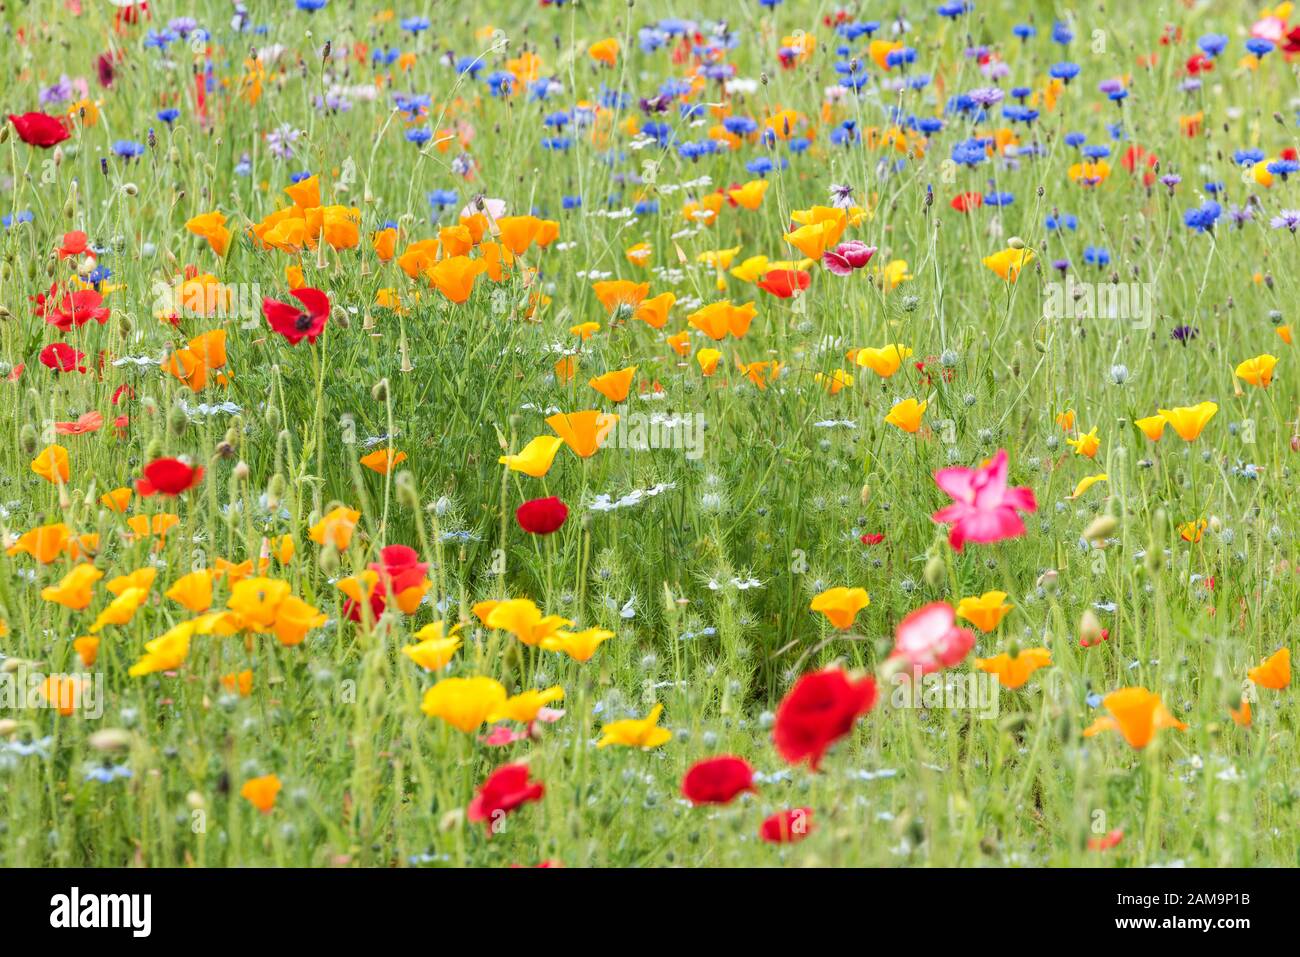 Colourful wild flowers in a field, wildflowers, wild flowers UK Stock Photo